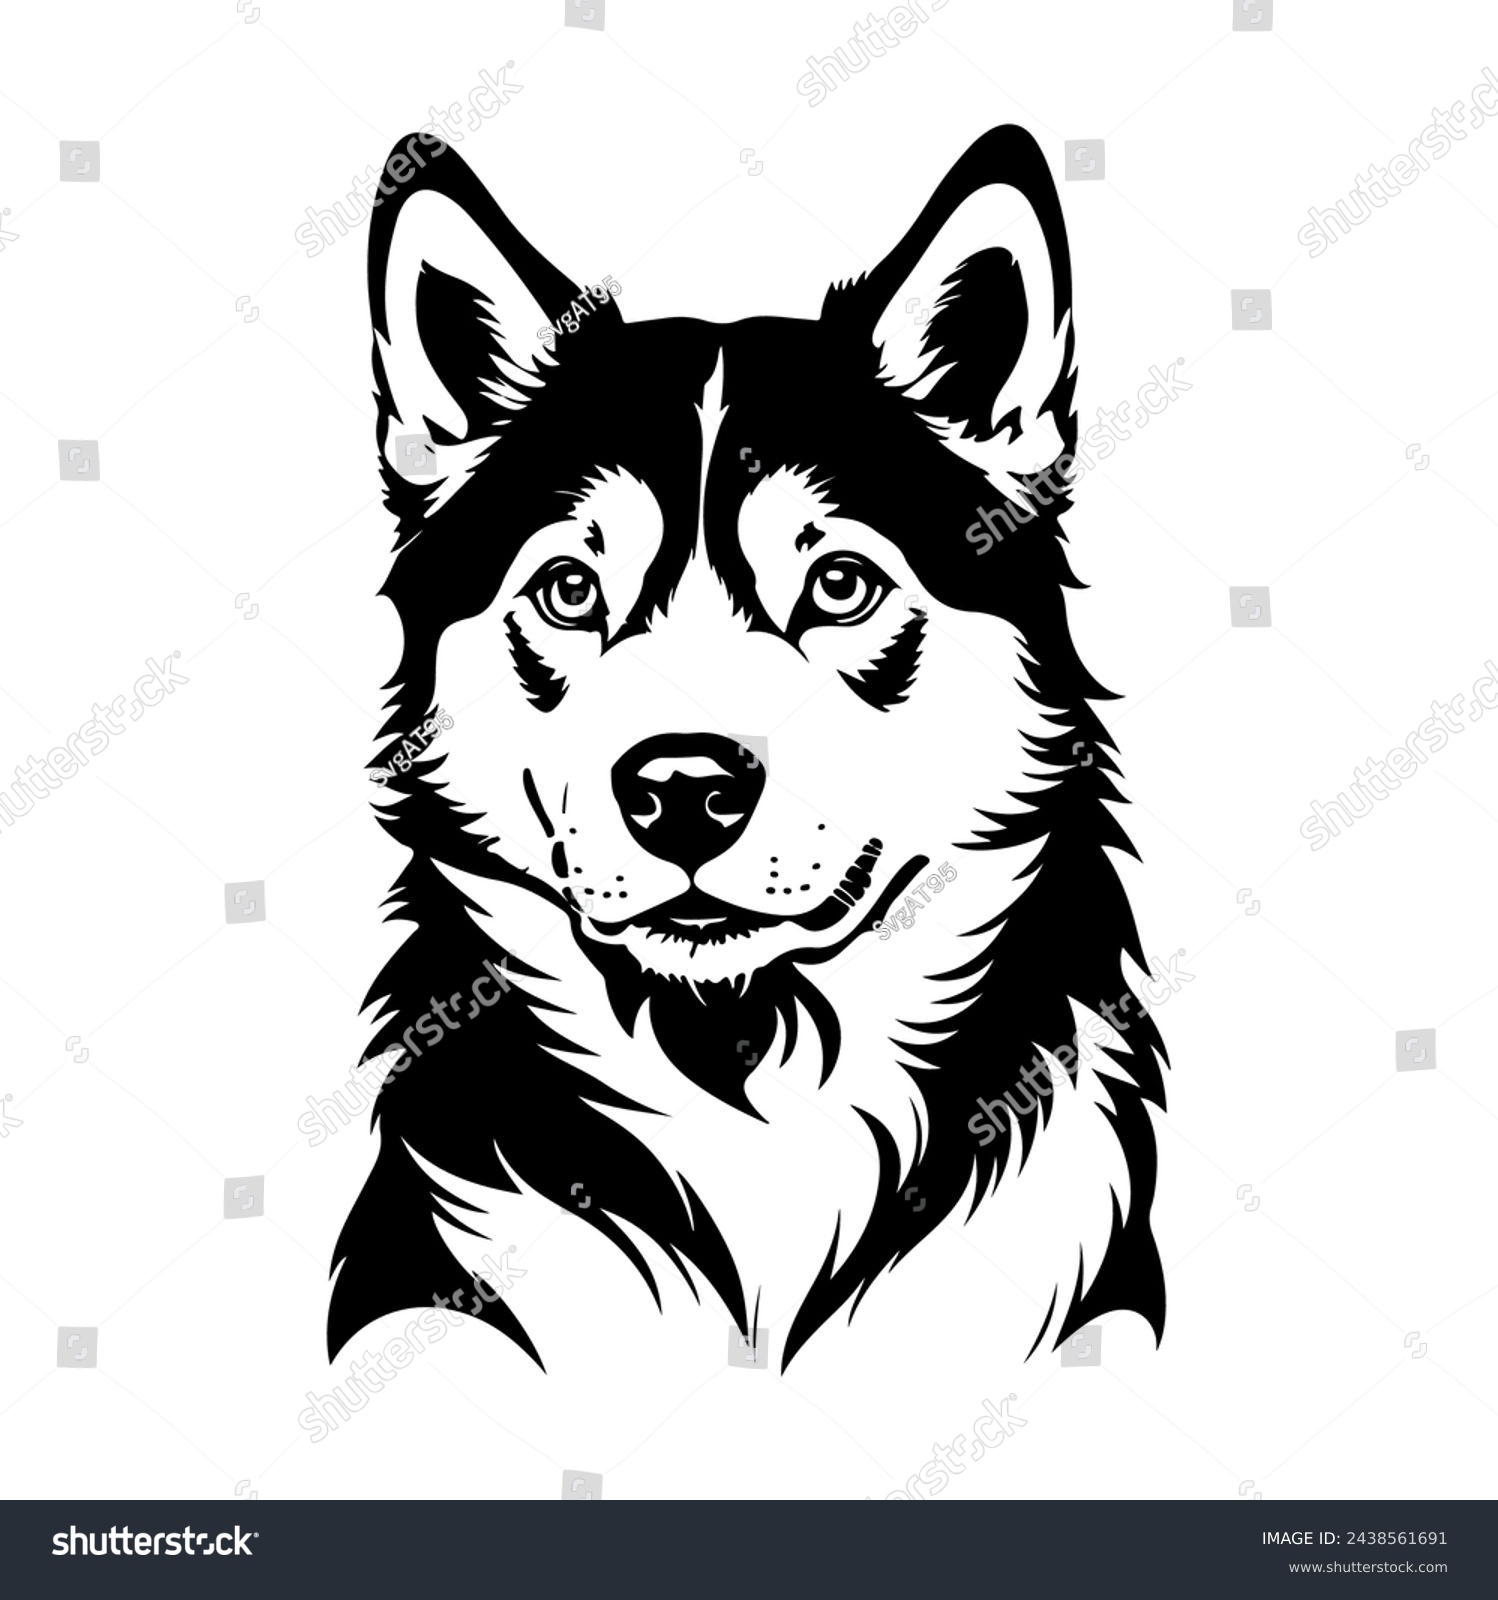 SVG of Portrait of a Siberian Husky Dog Vector isolated on white background, Dog Silhouettes. svg